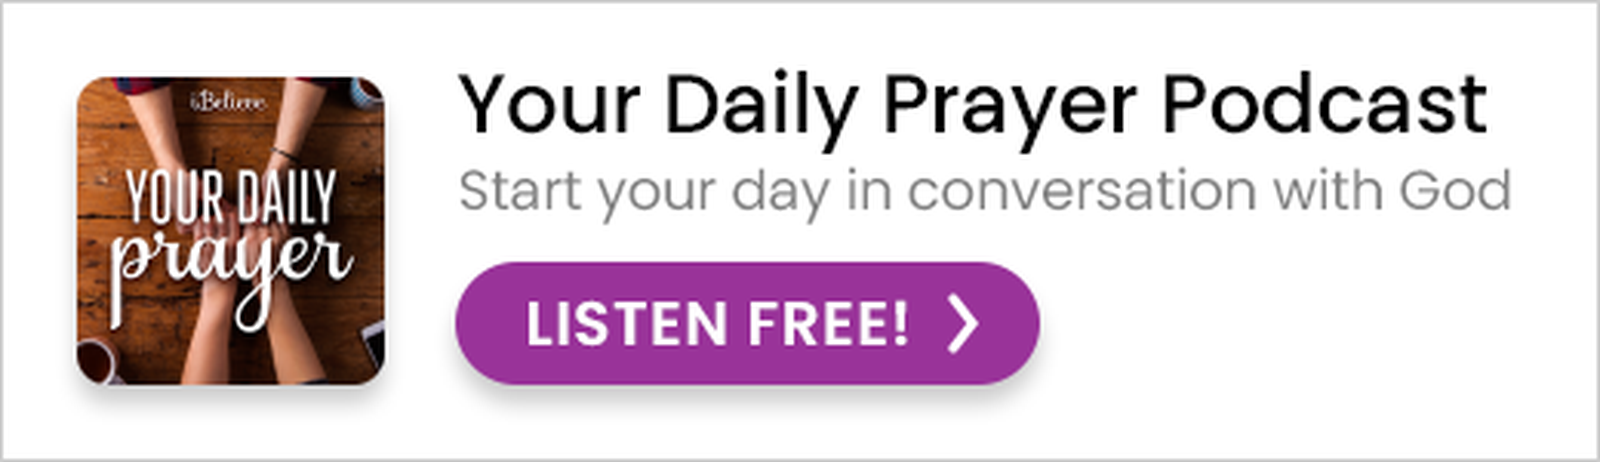 Your Daily Prayer Ad